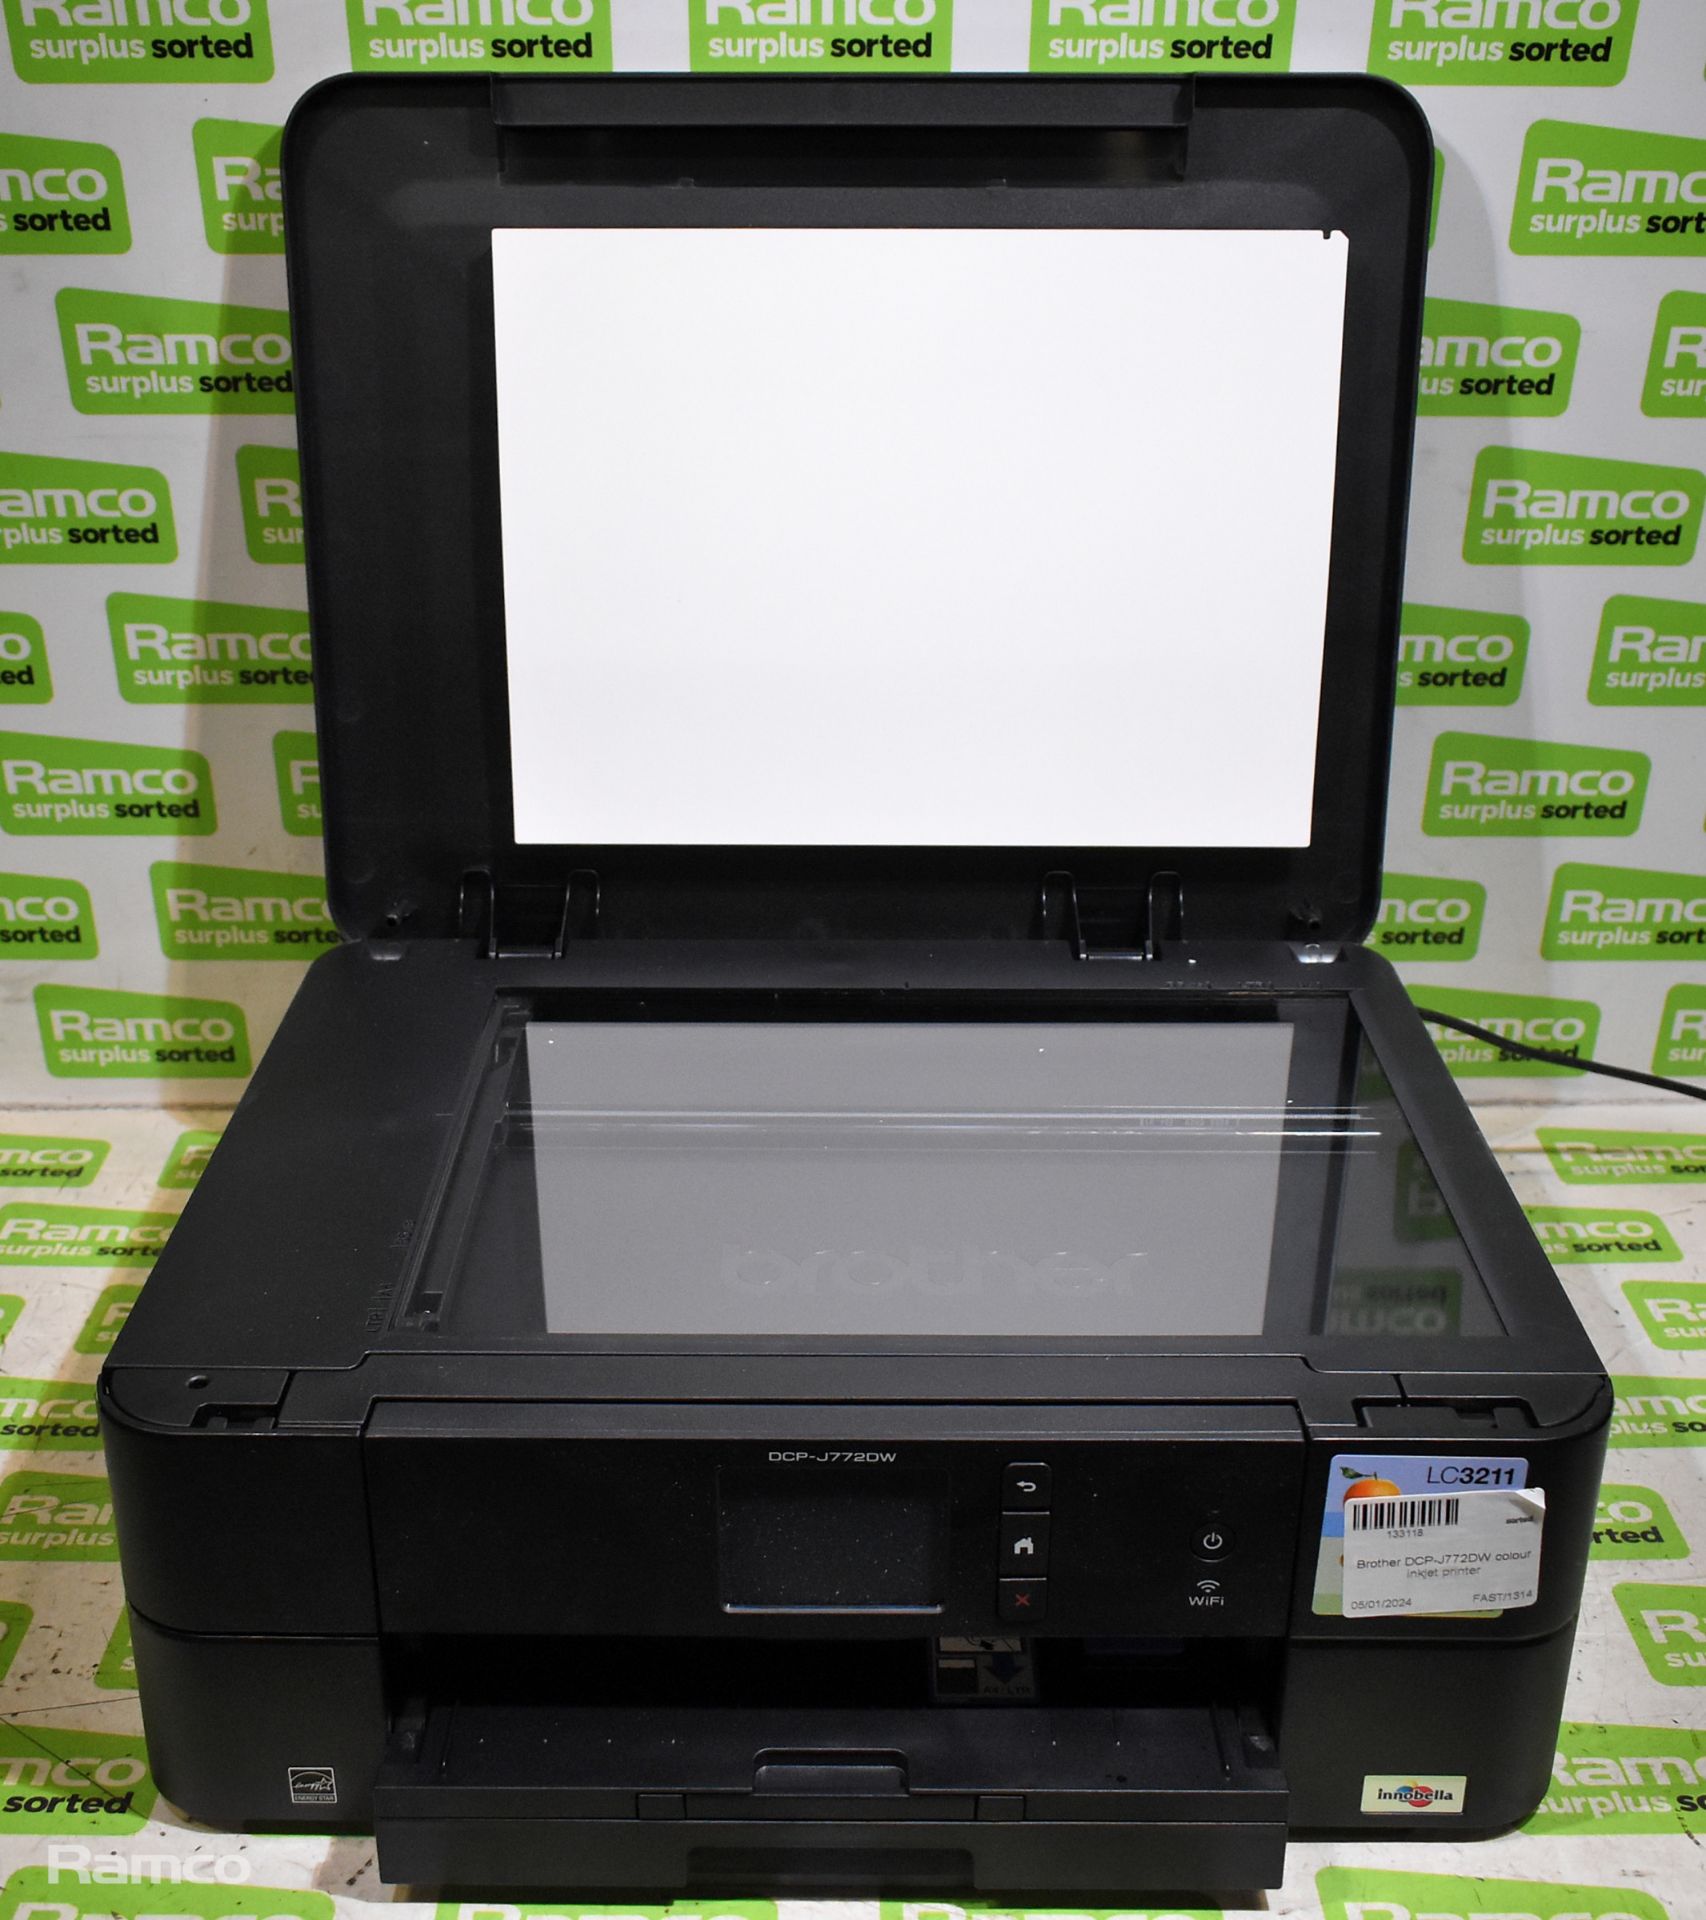 NEC NP-M402W LCD projector - 100-240v - 50 / 60Hz, Brother DCP-J772DW colour inkjet printer - Image 7 of 10